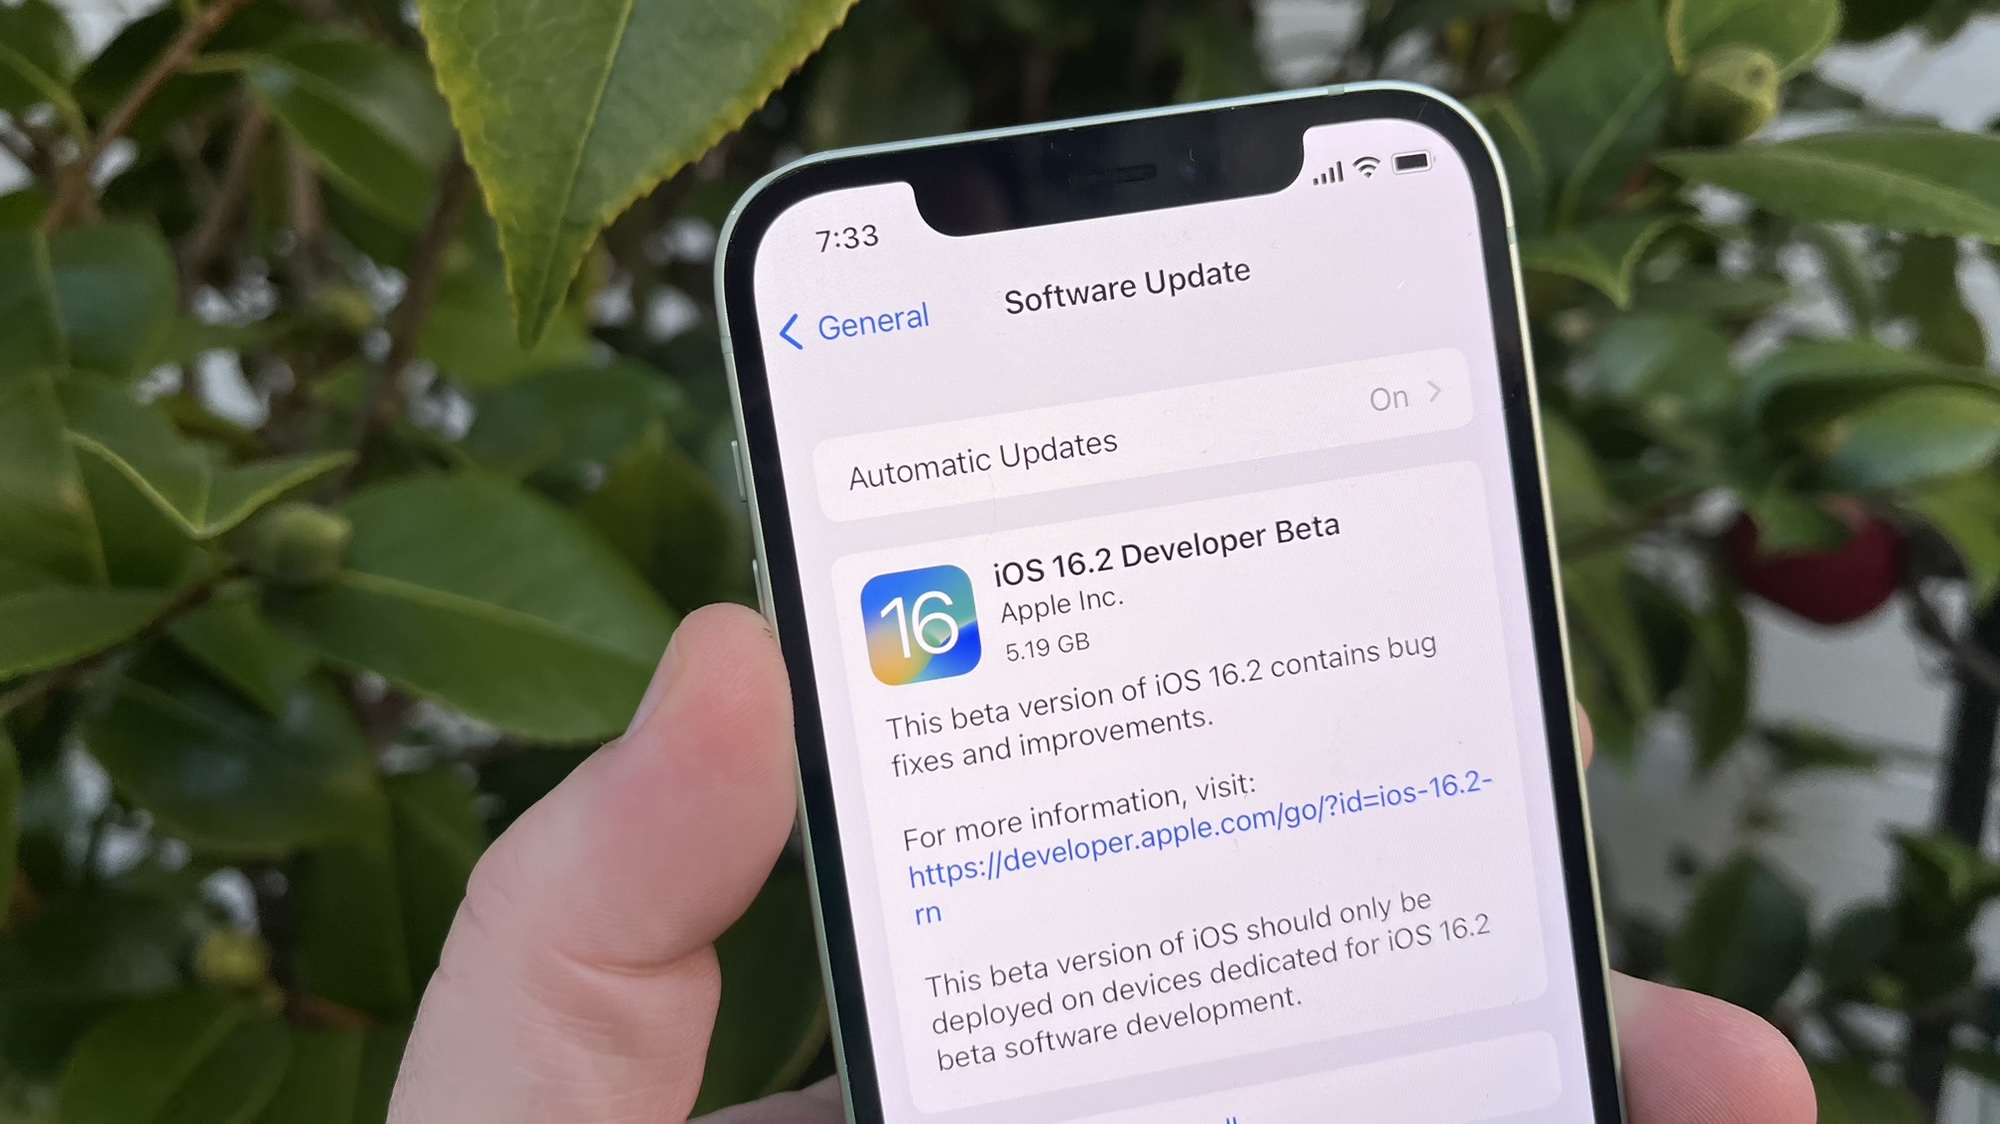 iOS 16.2 beta 1 iPhone download screen in front of the factory